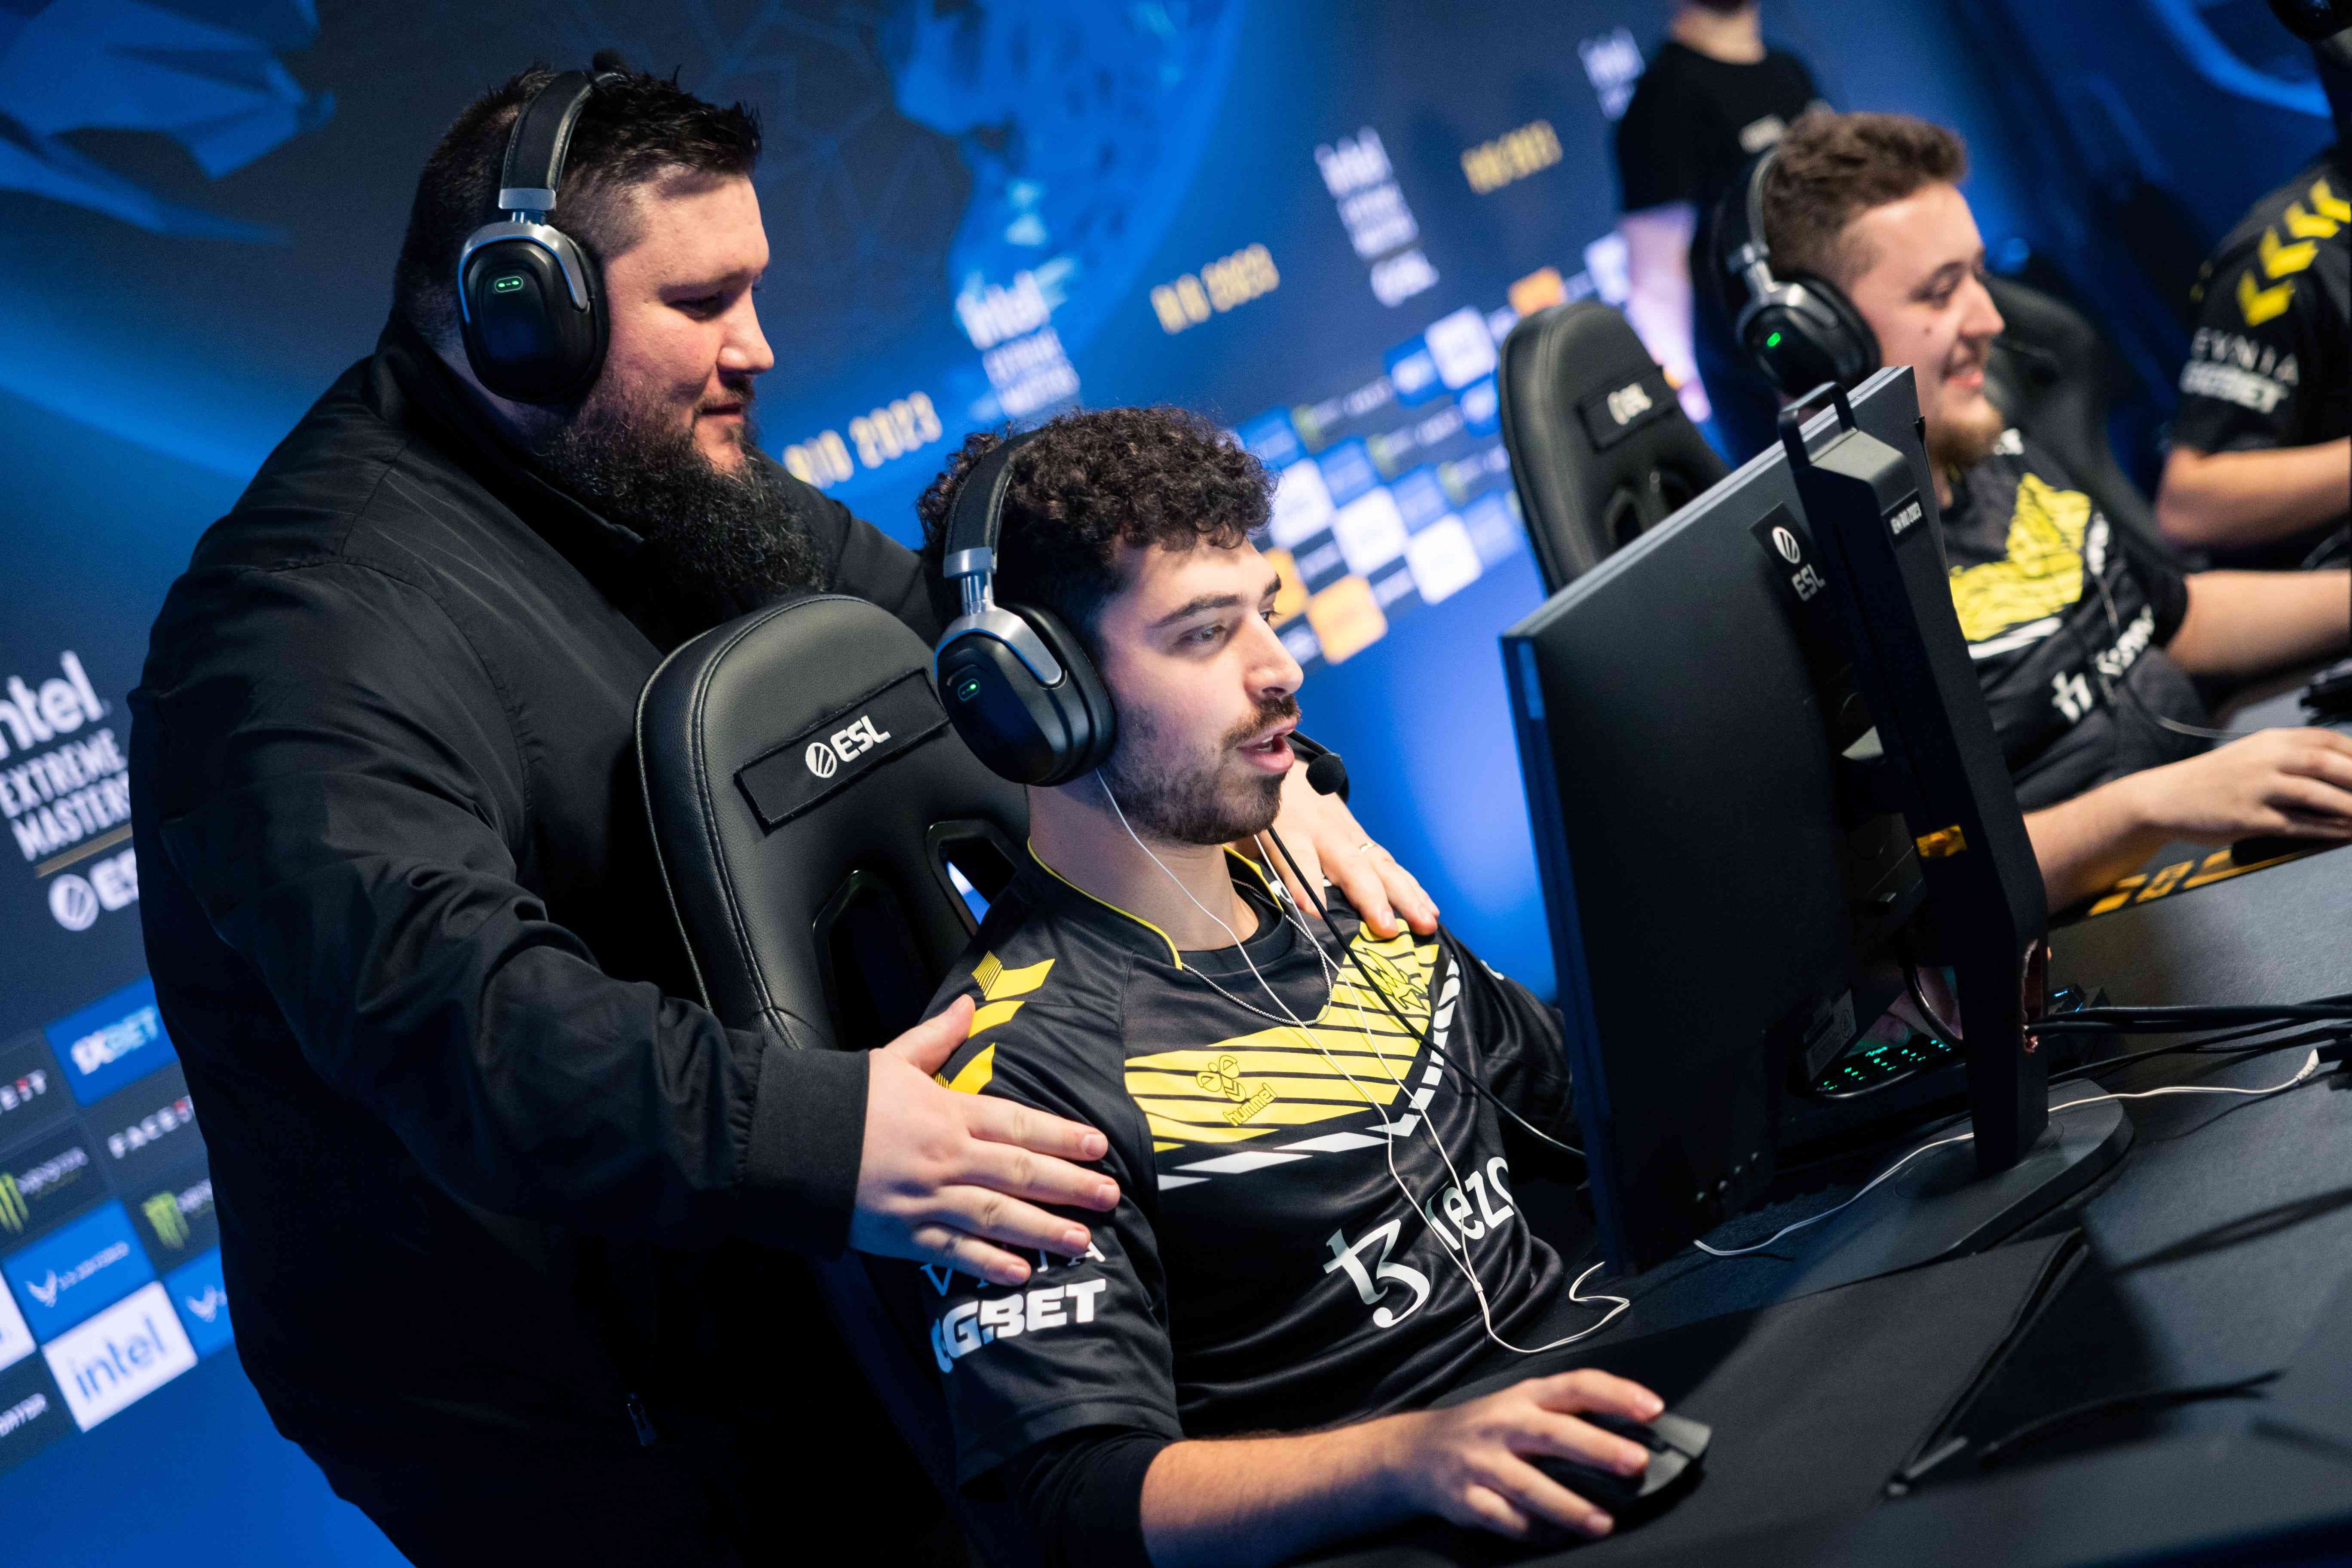 Spinx’s contribution will be vital for Vitality’s title hopes (Image Credits: ESL | Adela Sznajder)